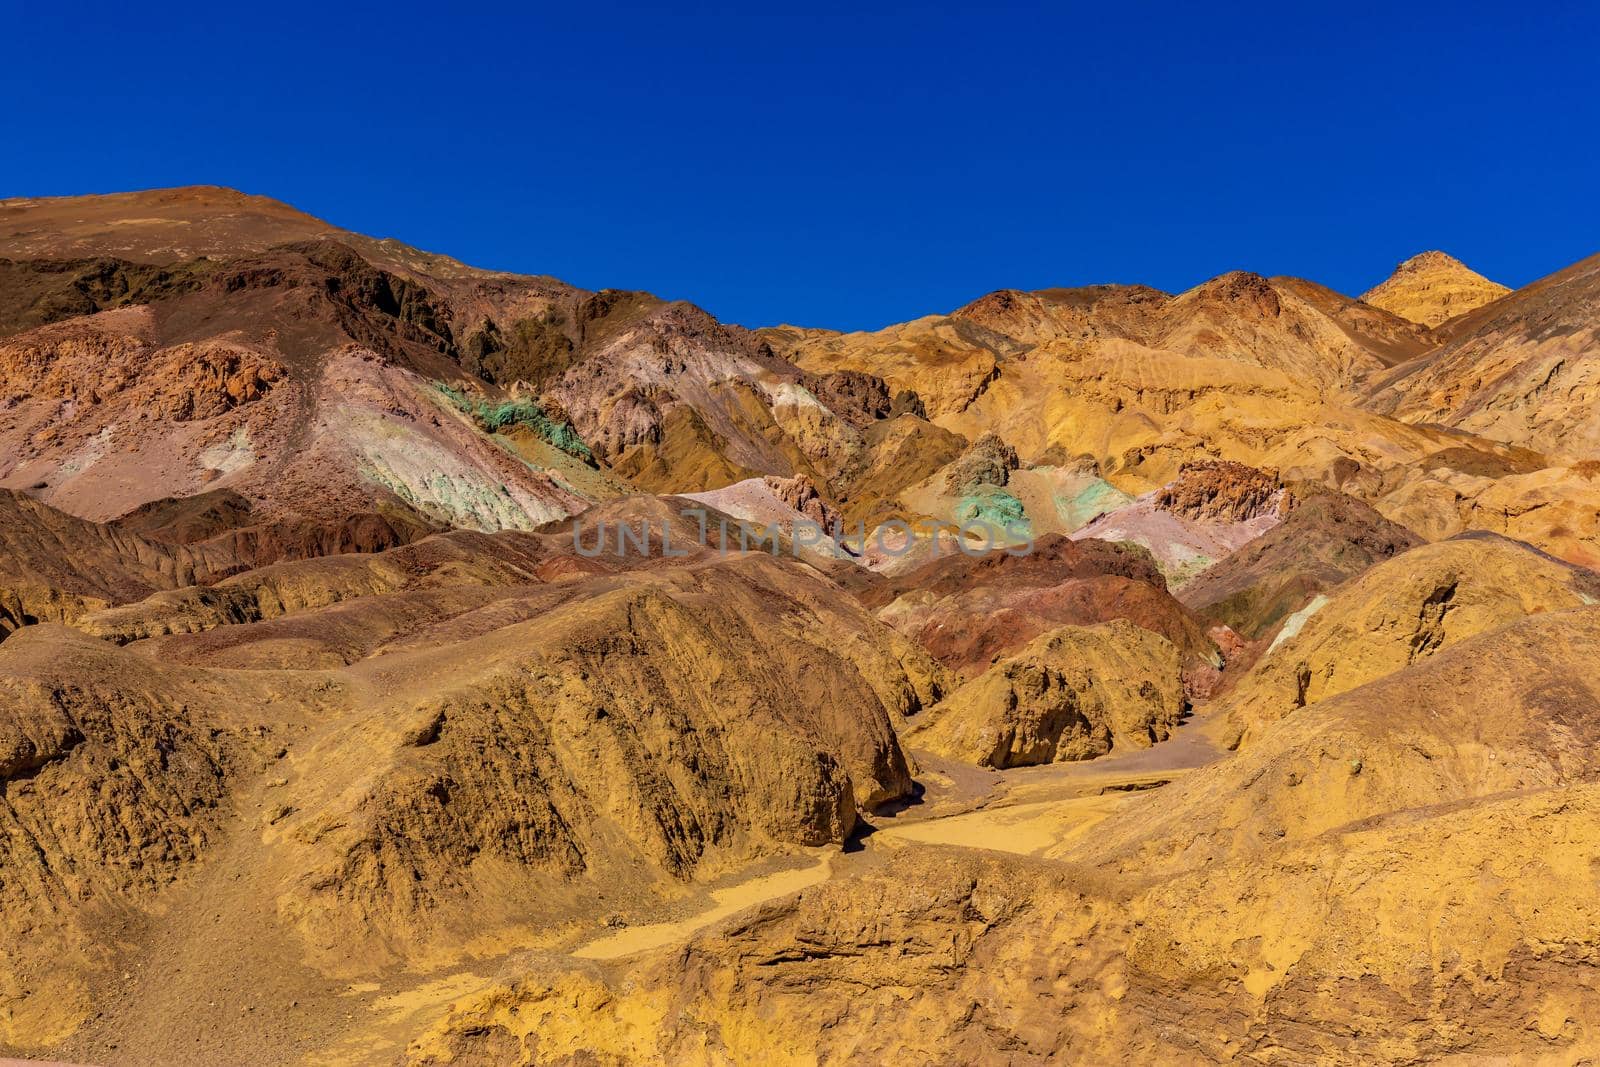 Colorful Artist’s Palette rocks on the mountain side in Death Valley National Park, California, USA